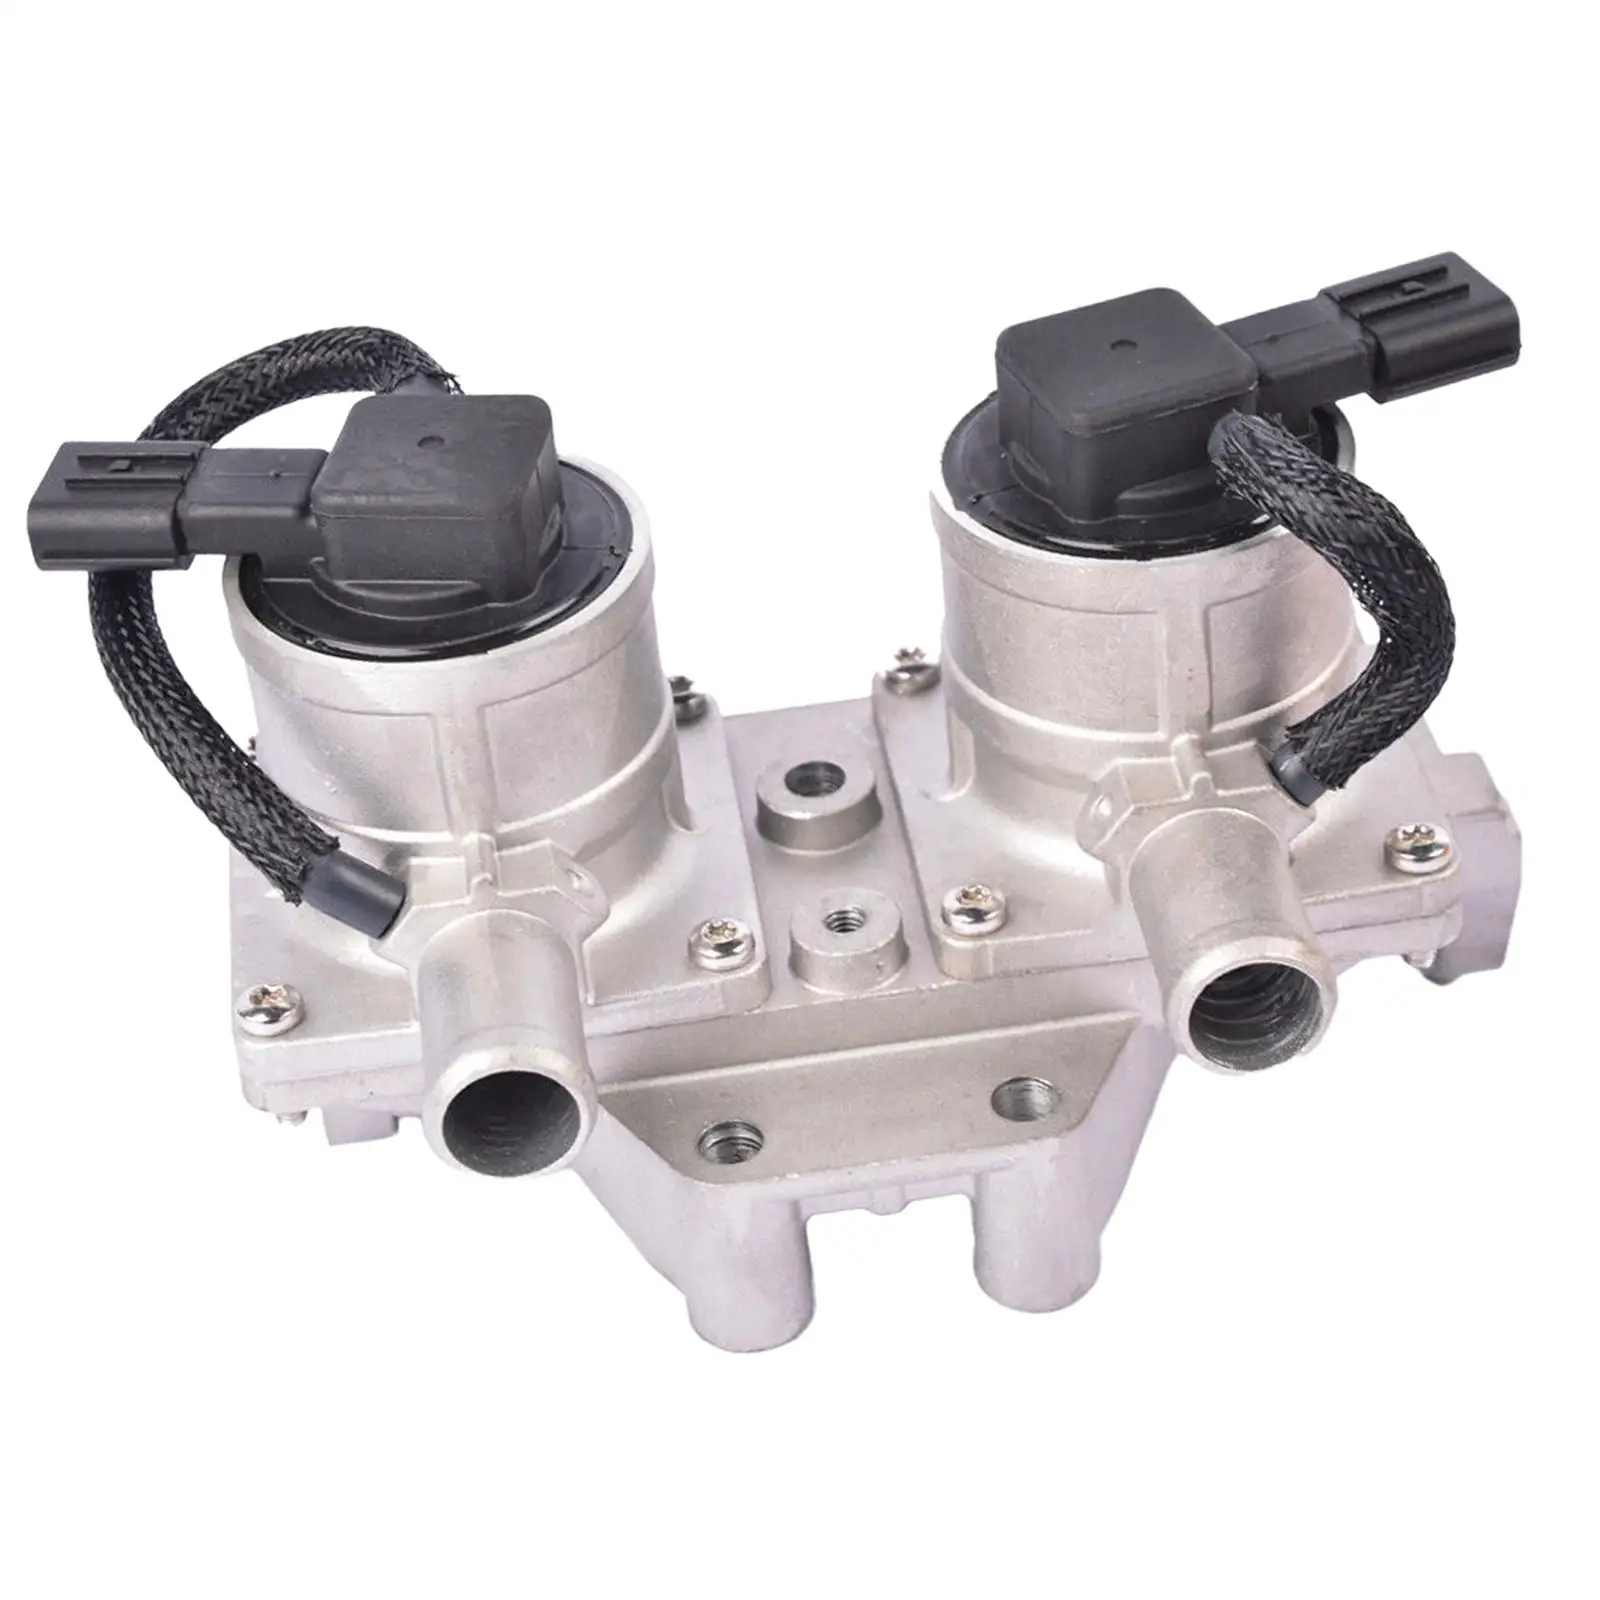 Secondary Valve 911-643 Replace Assembly Durable Accessories Easily Install